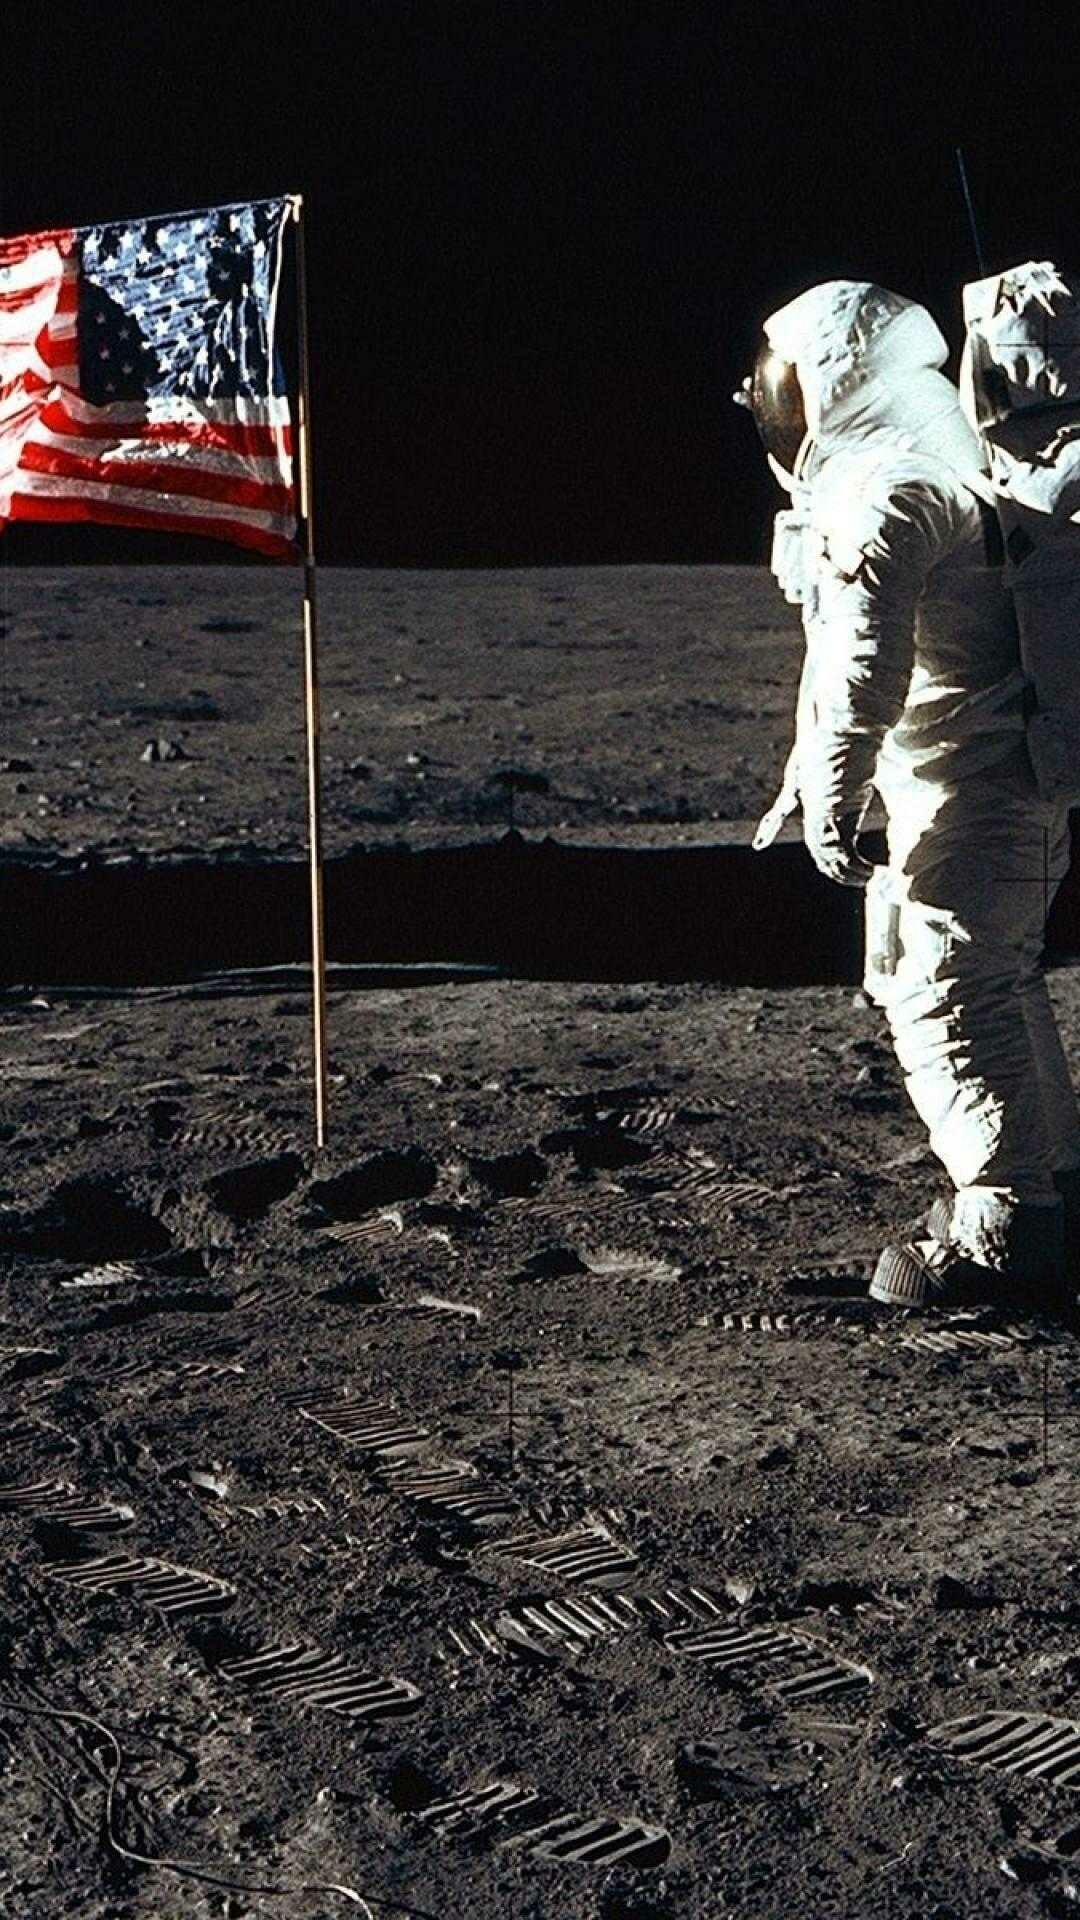 Apollo 11: The Lunar Module Eagle, carrying Neil Armstrong and Buzz Aldrin landed on the Moon. 1080x1920 Full HD Background.